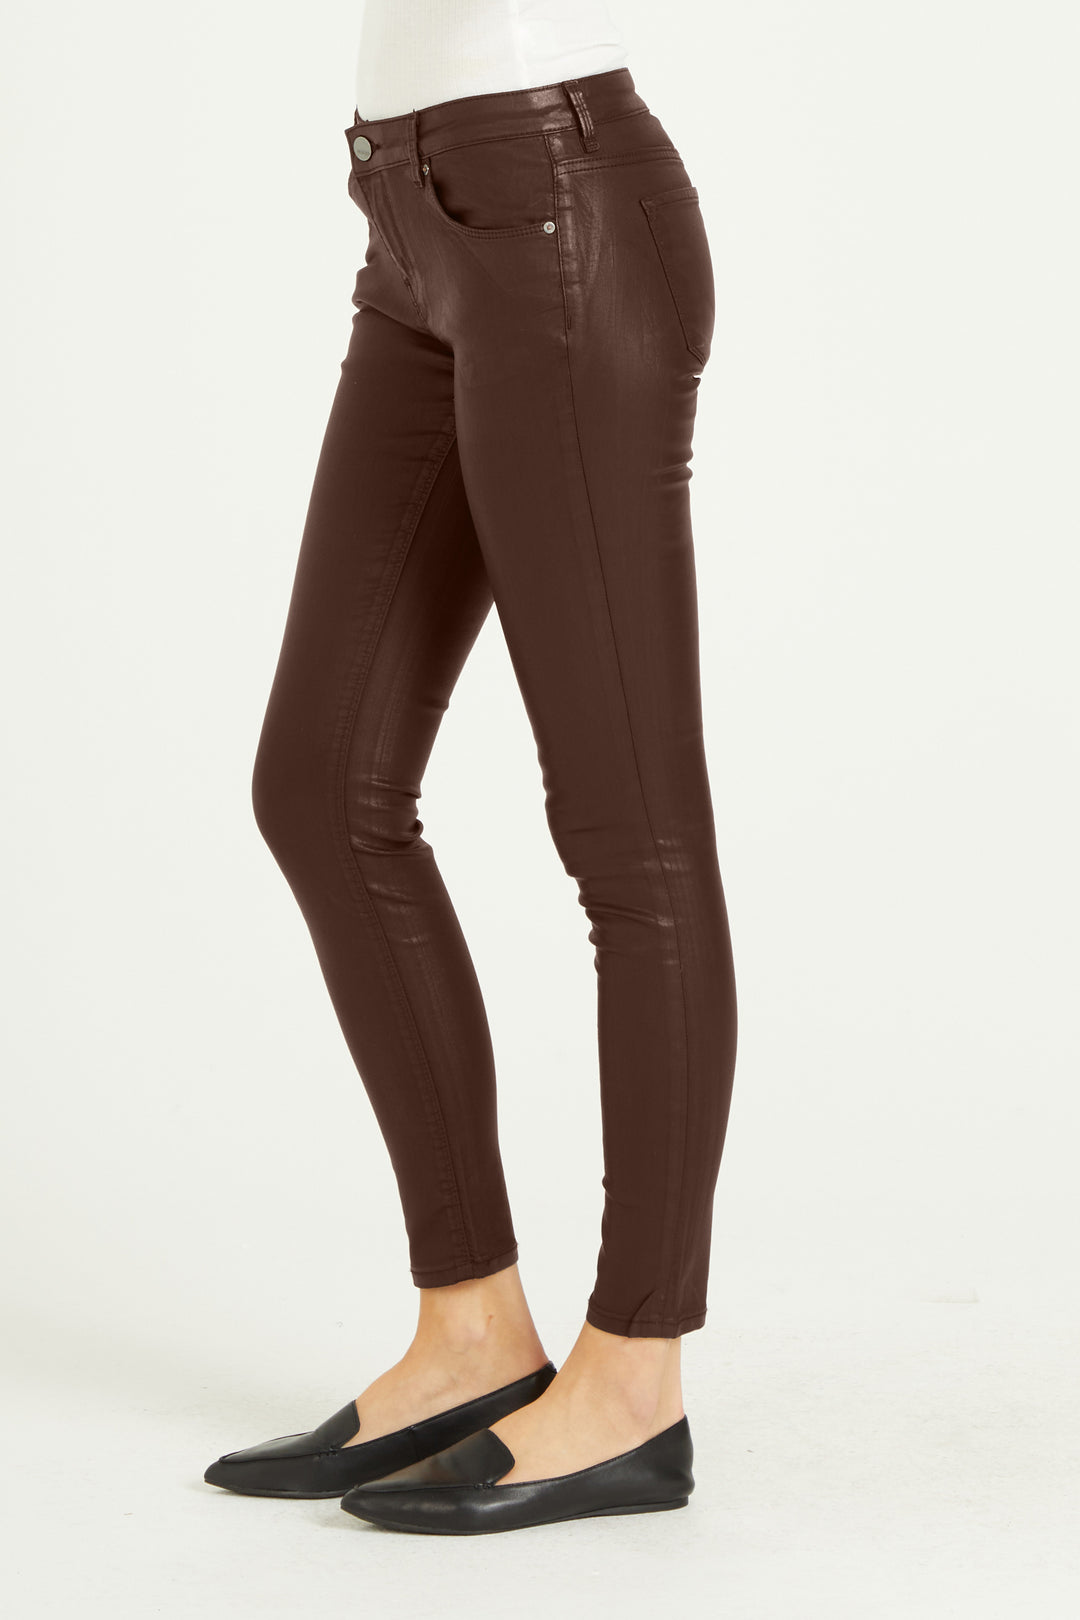 image of a female model wearing a PIXIE HIGH RISE ANKLE SKINNY JEANS ESPRESSO COATED JEANS